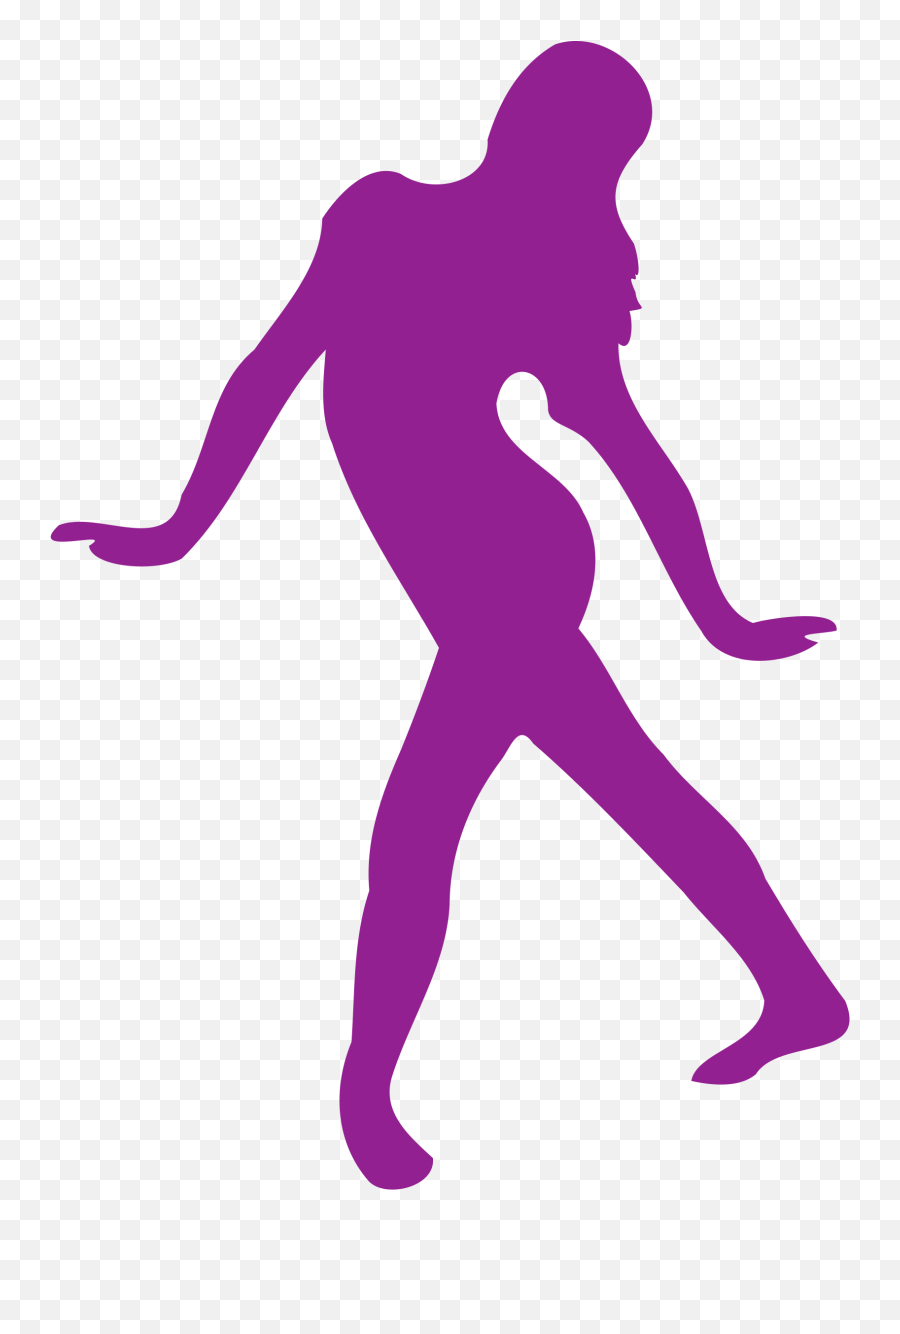 This Free Icons Png Design Of Silhouette Danse 05 - Free Dancer Clipart Purple Silhouette Emoji,Dance Silhouettes Clipart